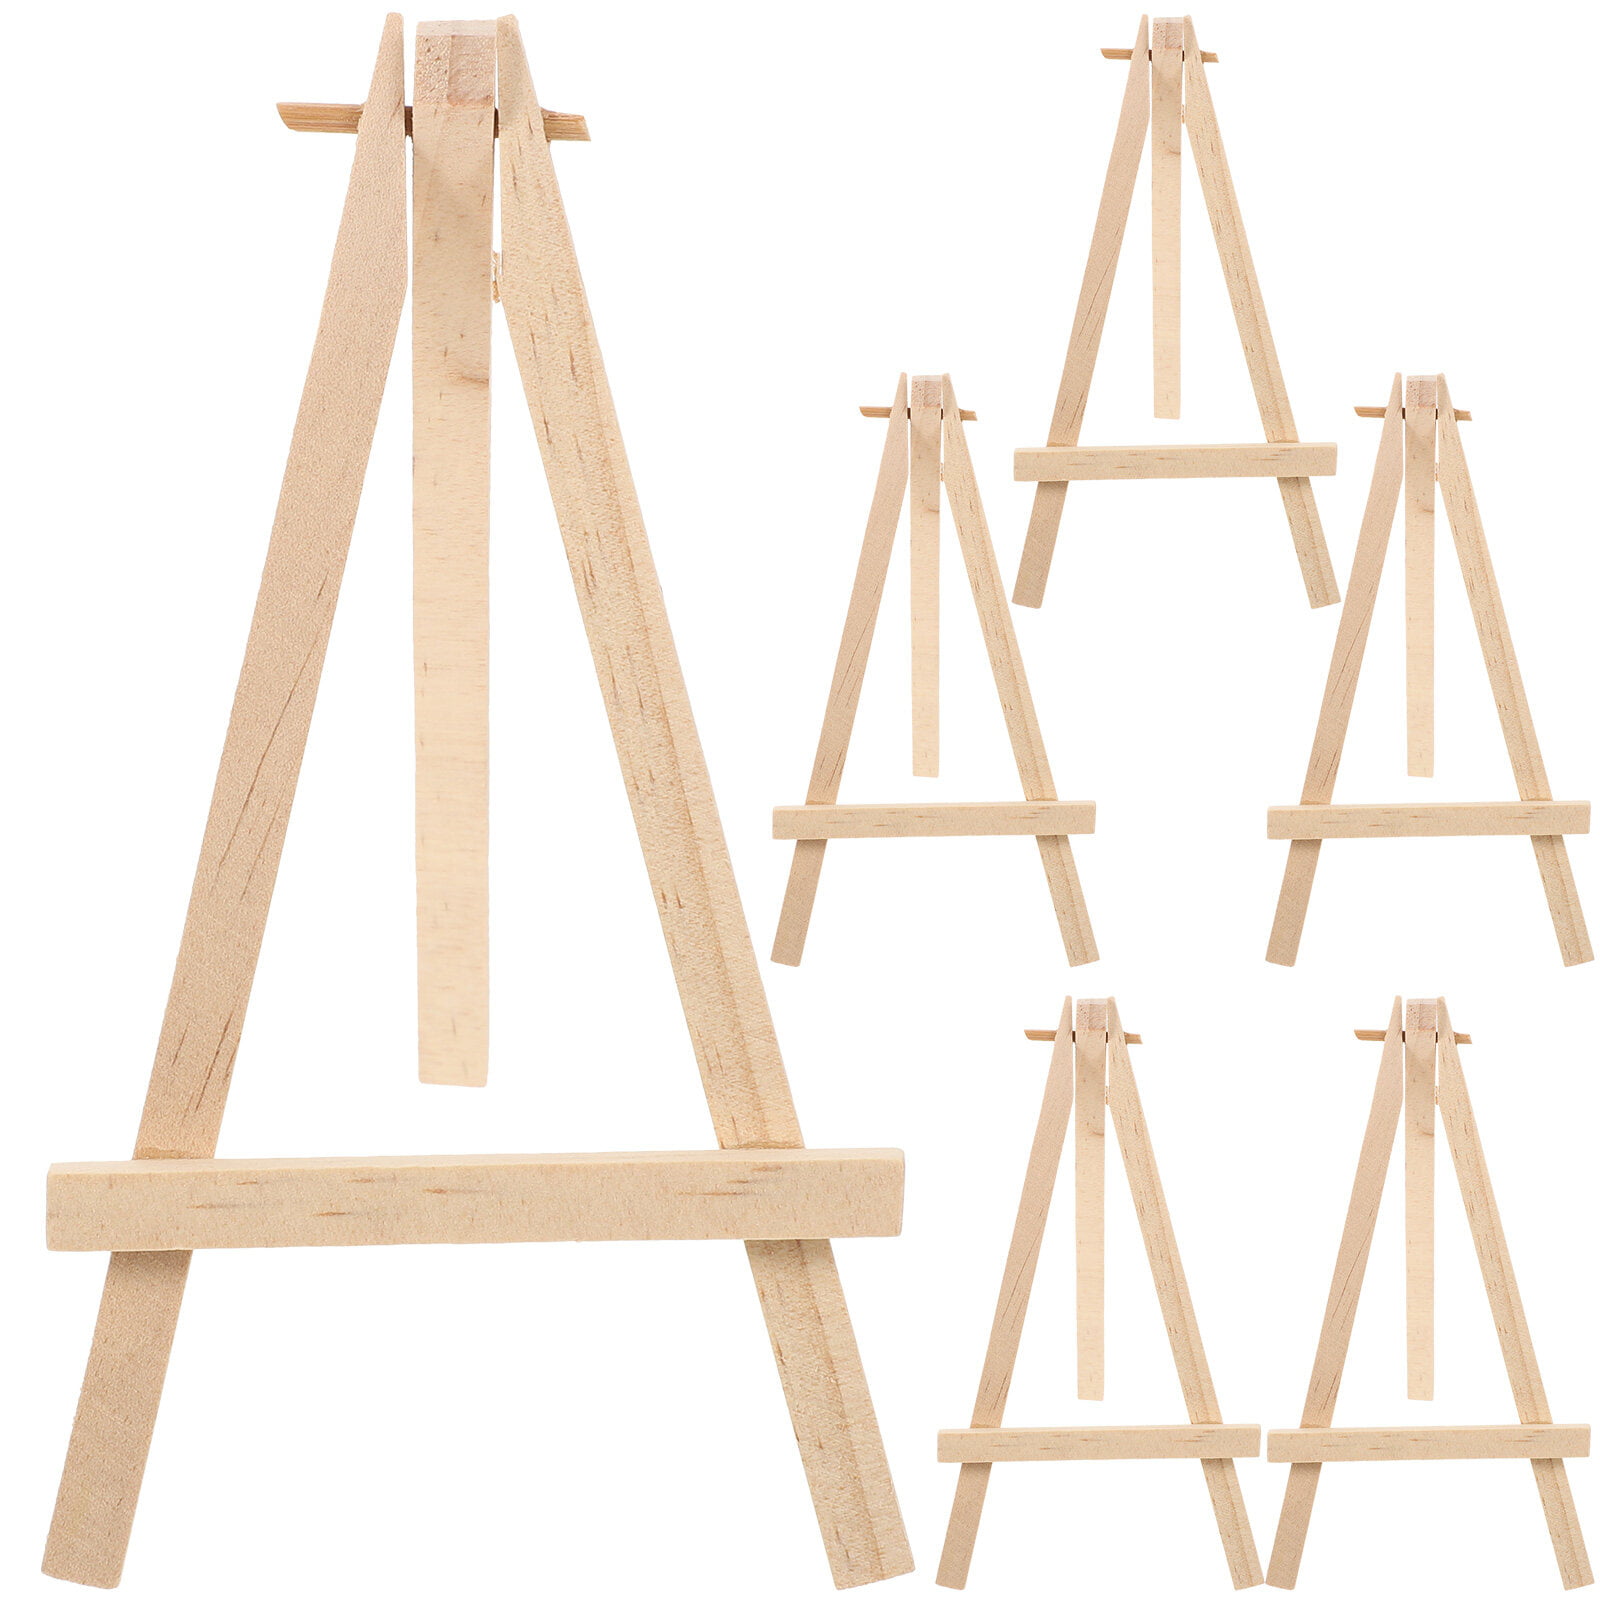  2PCS Wooden Easel,16 Foldable Tabletop Display Easels for  Painting Canvas Adjustable Art Canvas Easel Stand for Kids Students Adults  Artist Painting Class Picture Display.